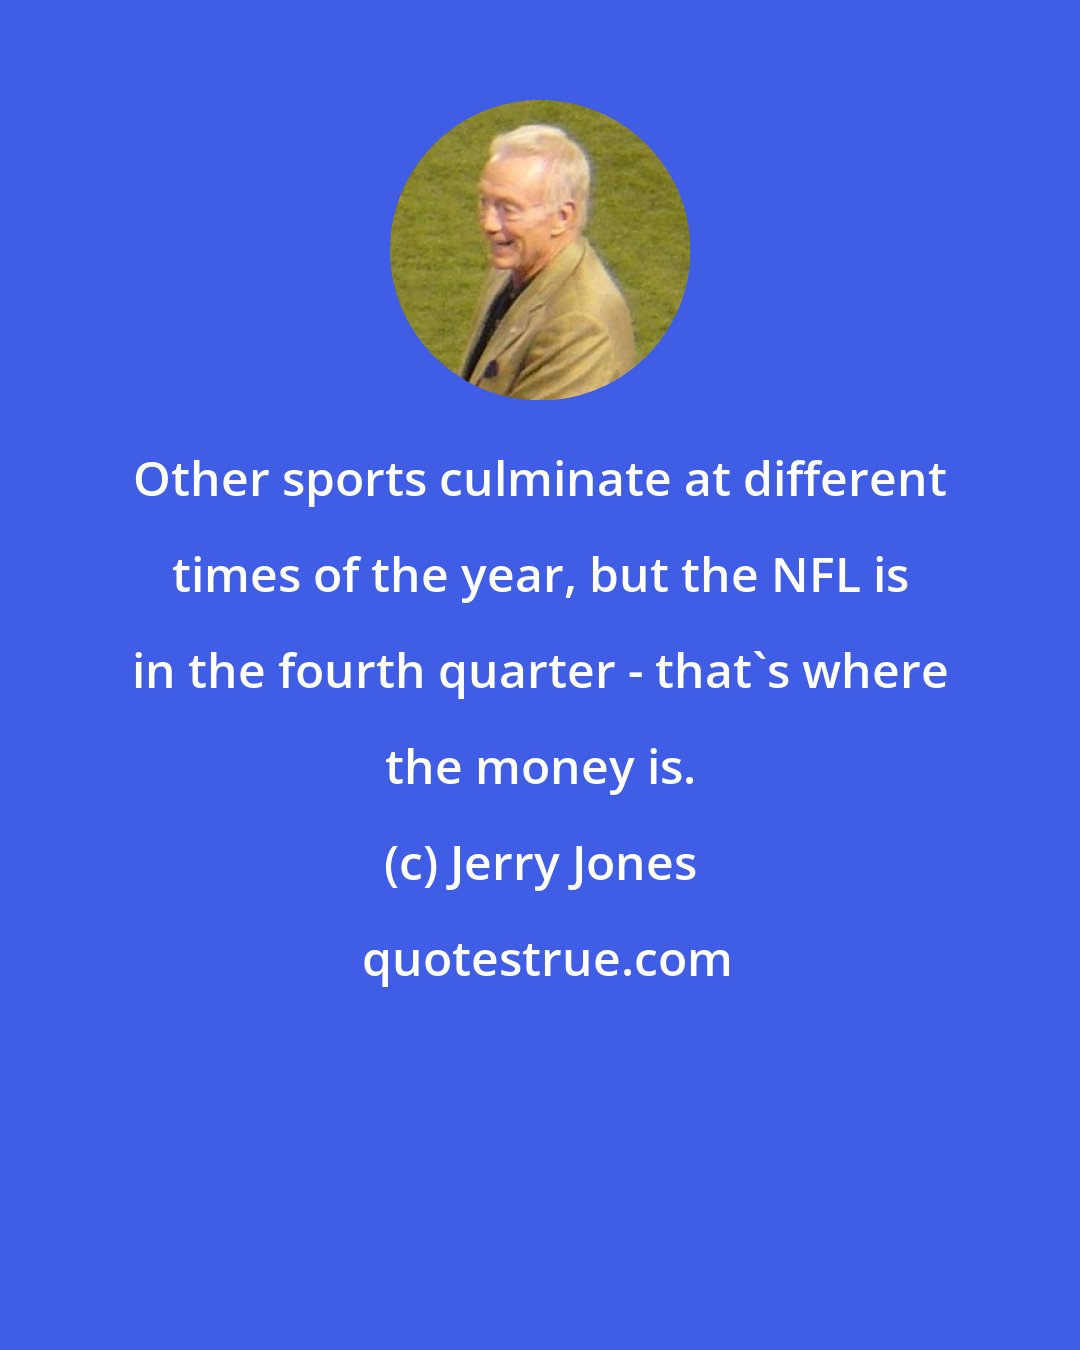 Jerry Jones: Other sports culminate at different times of the year, but the NFL is in the fourth quarter - that's where the money is.